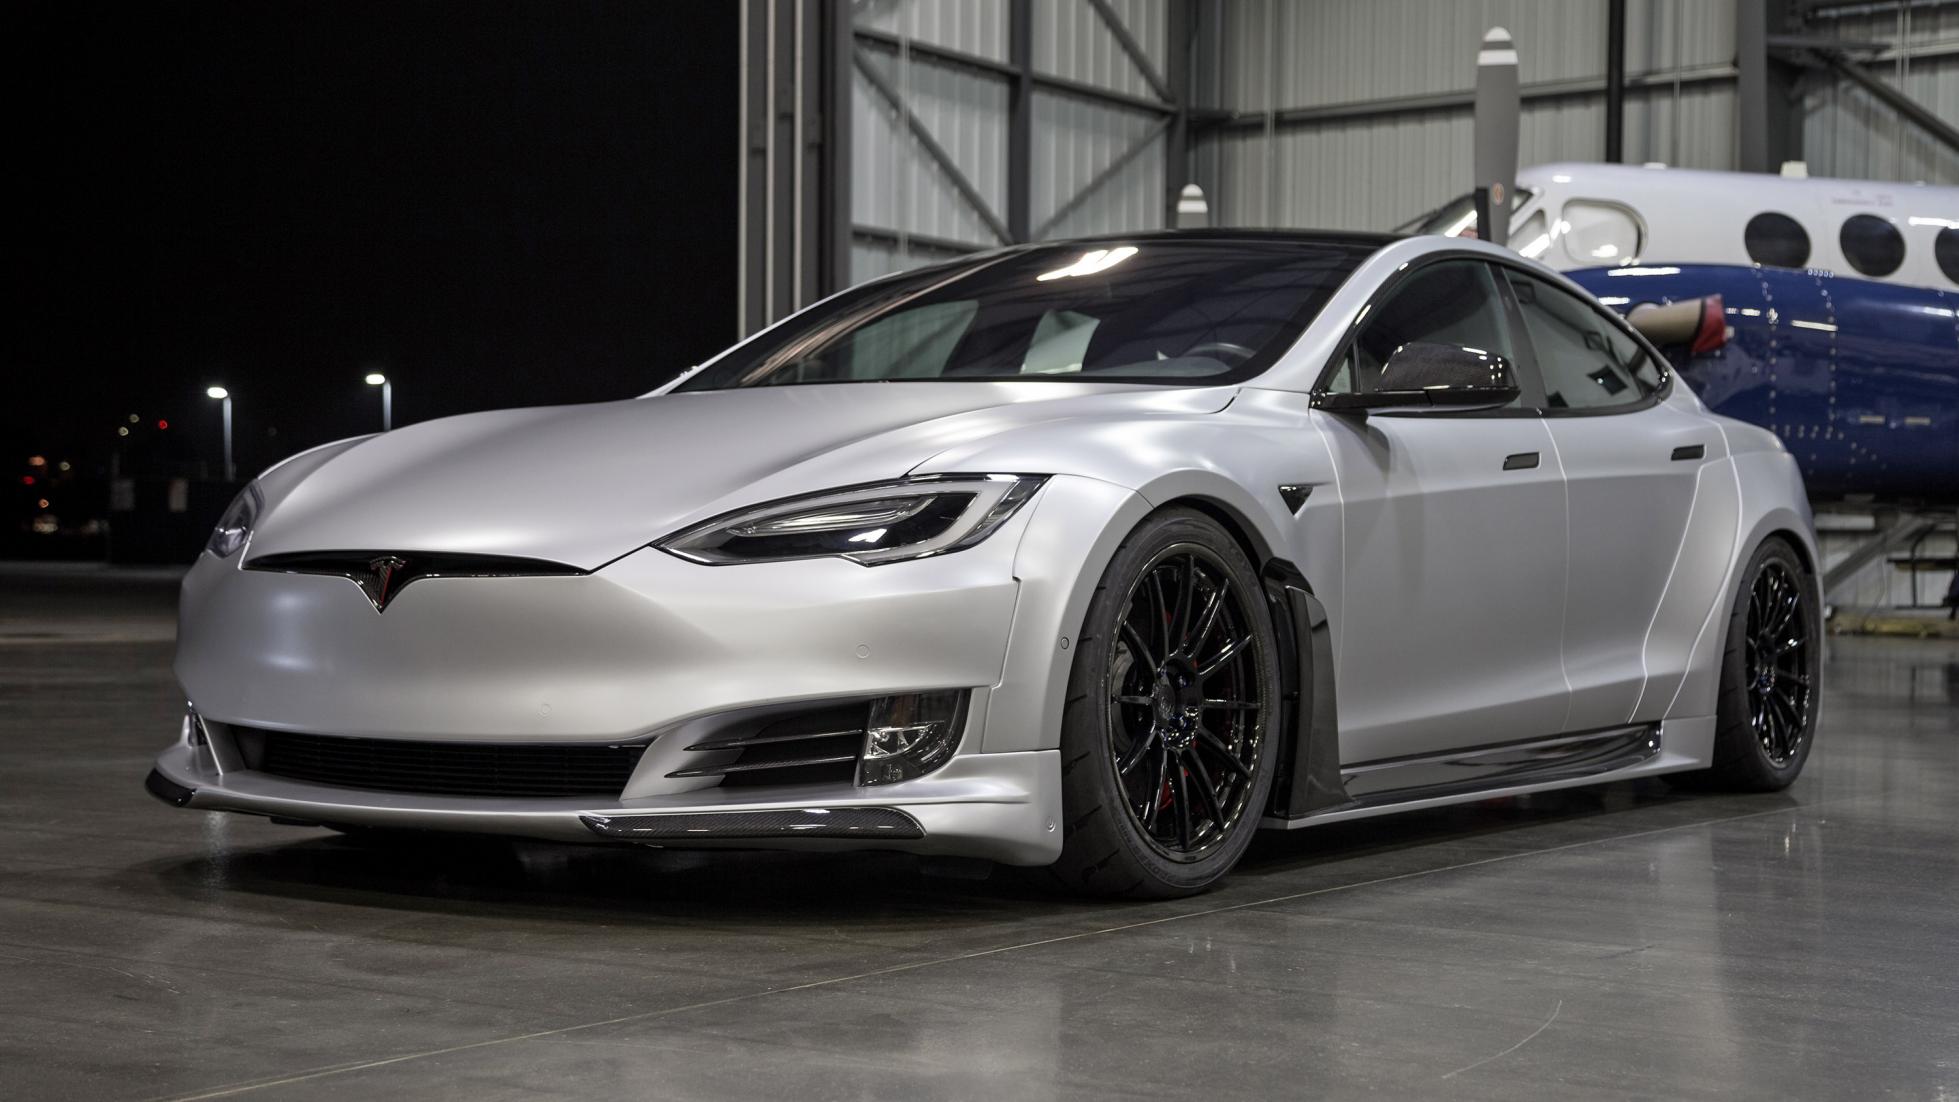  SEMA S Apex Goes Where Tesla Won t With Agressive Carbon 